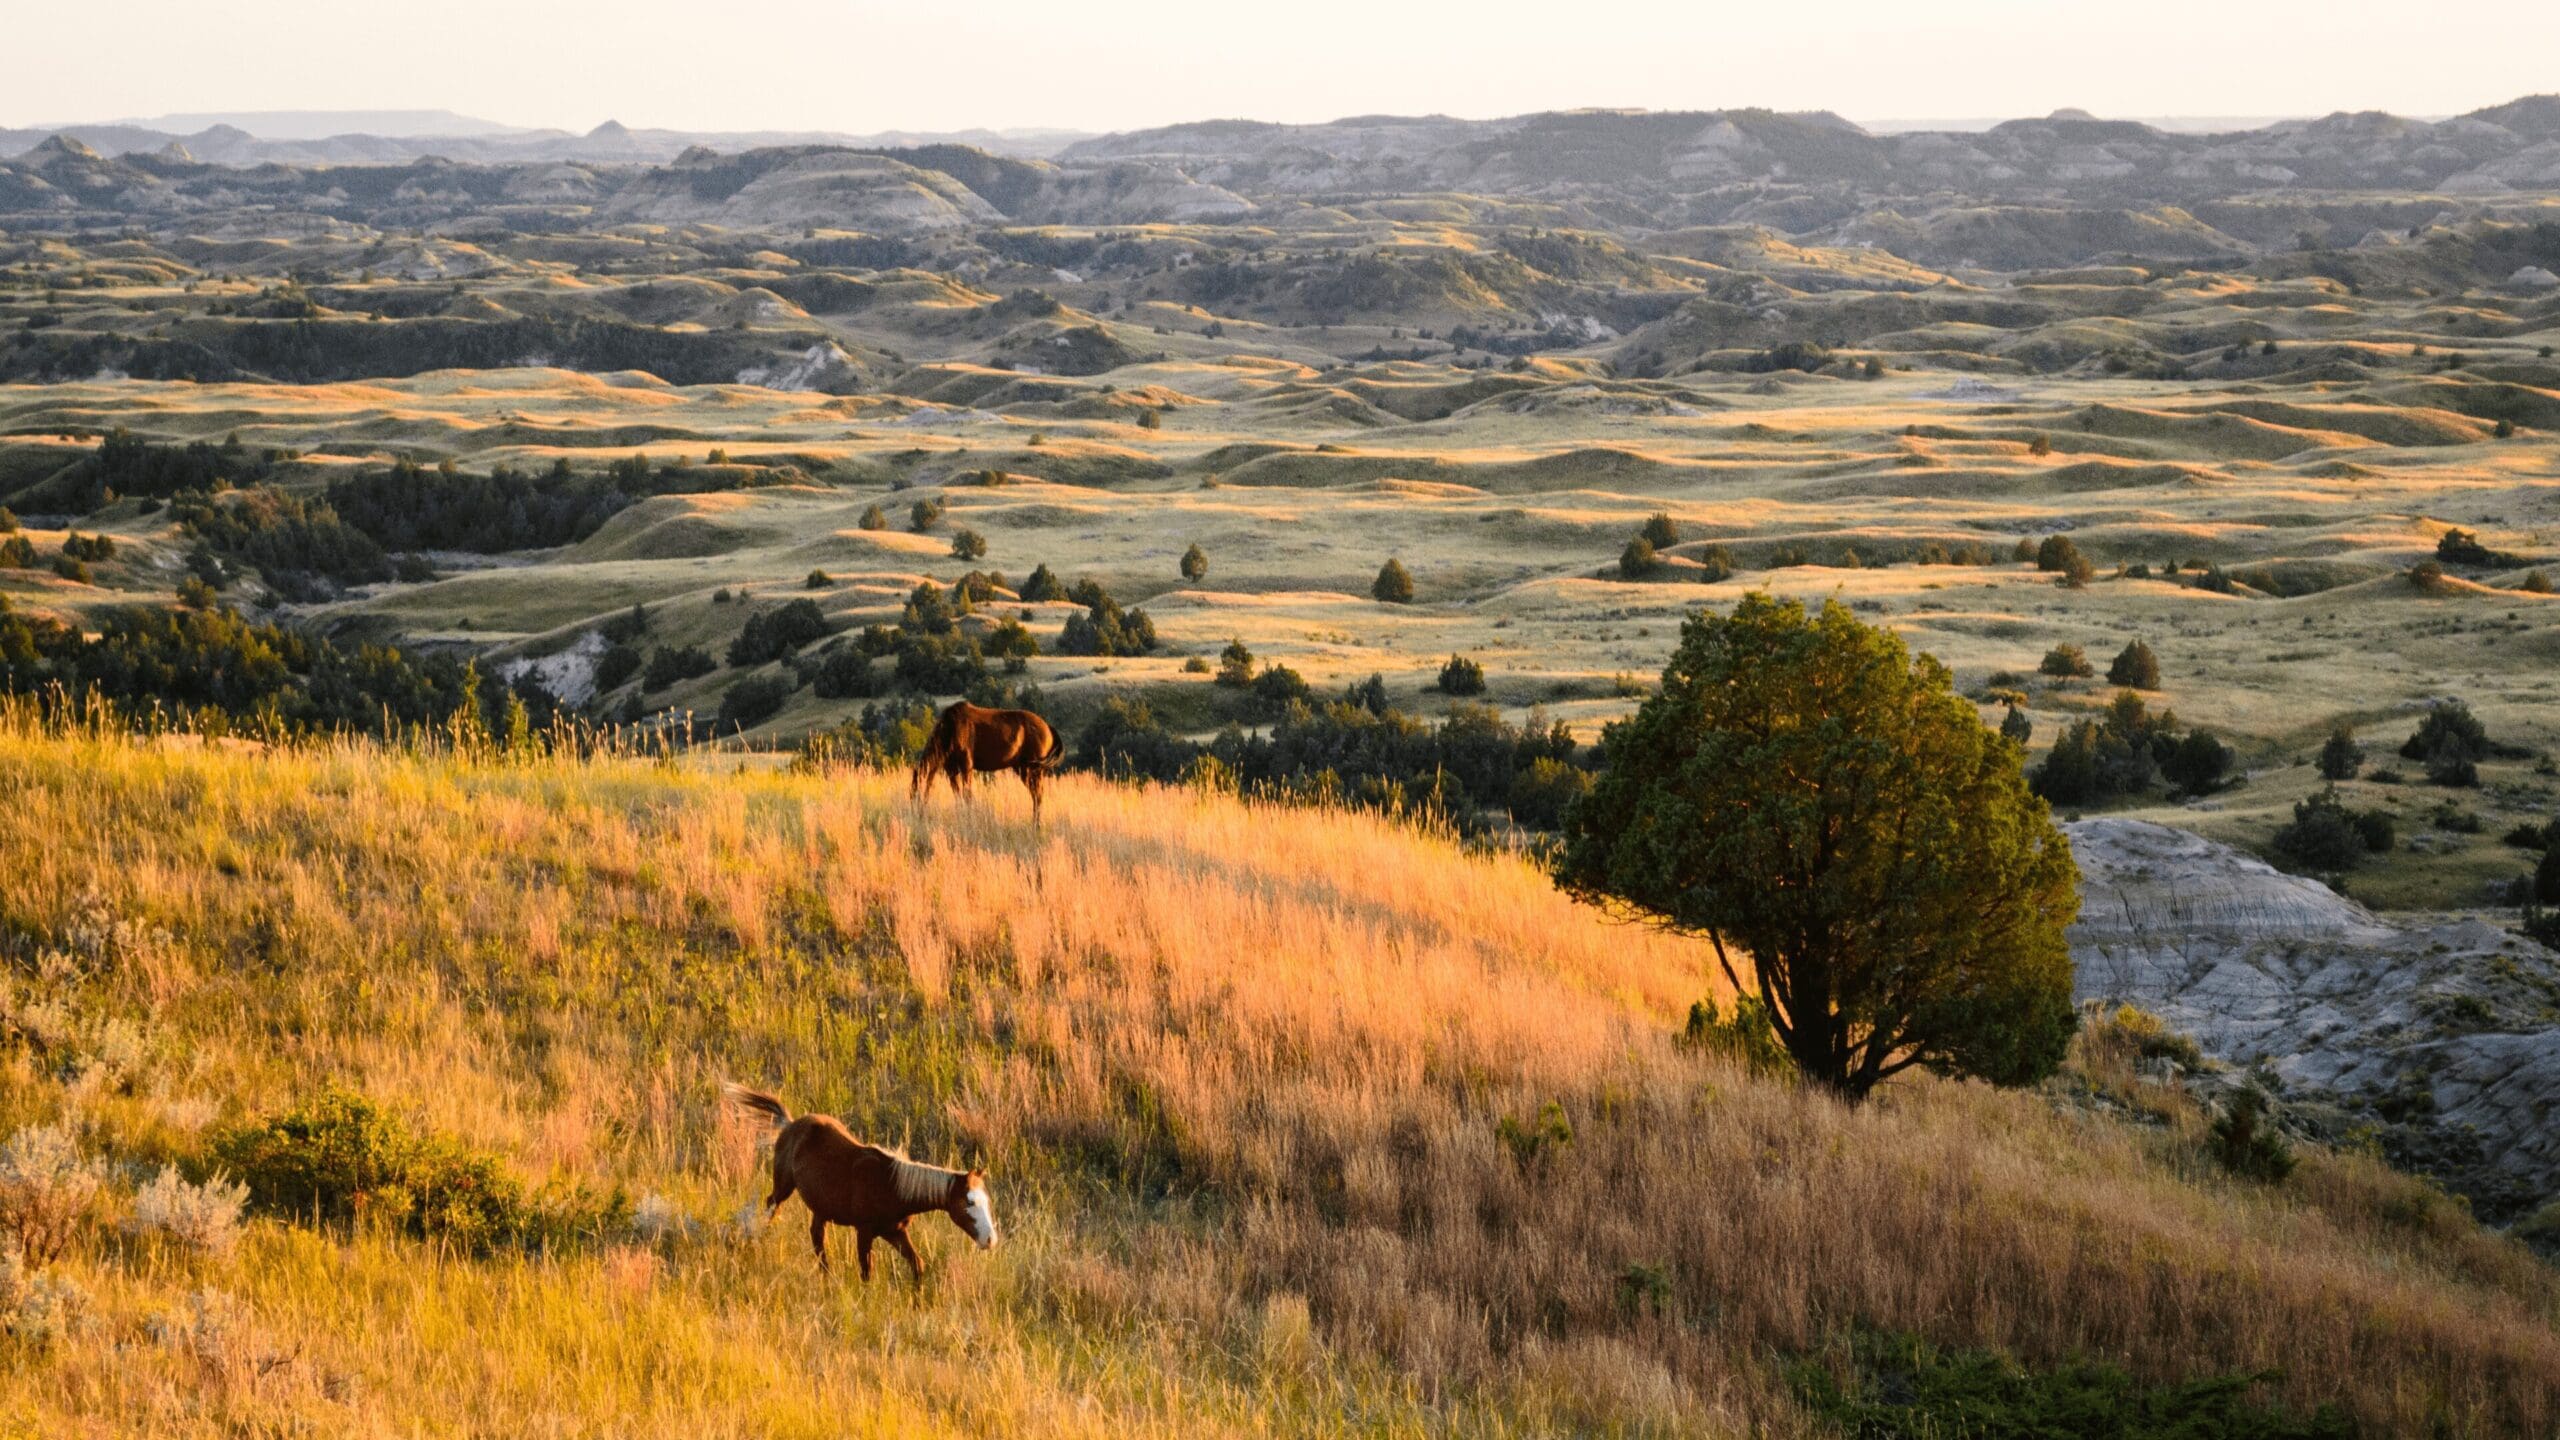 horses running through fields of yellow grass on a hill overlooking a valley